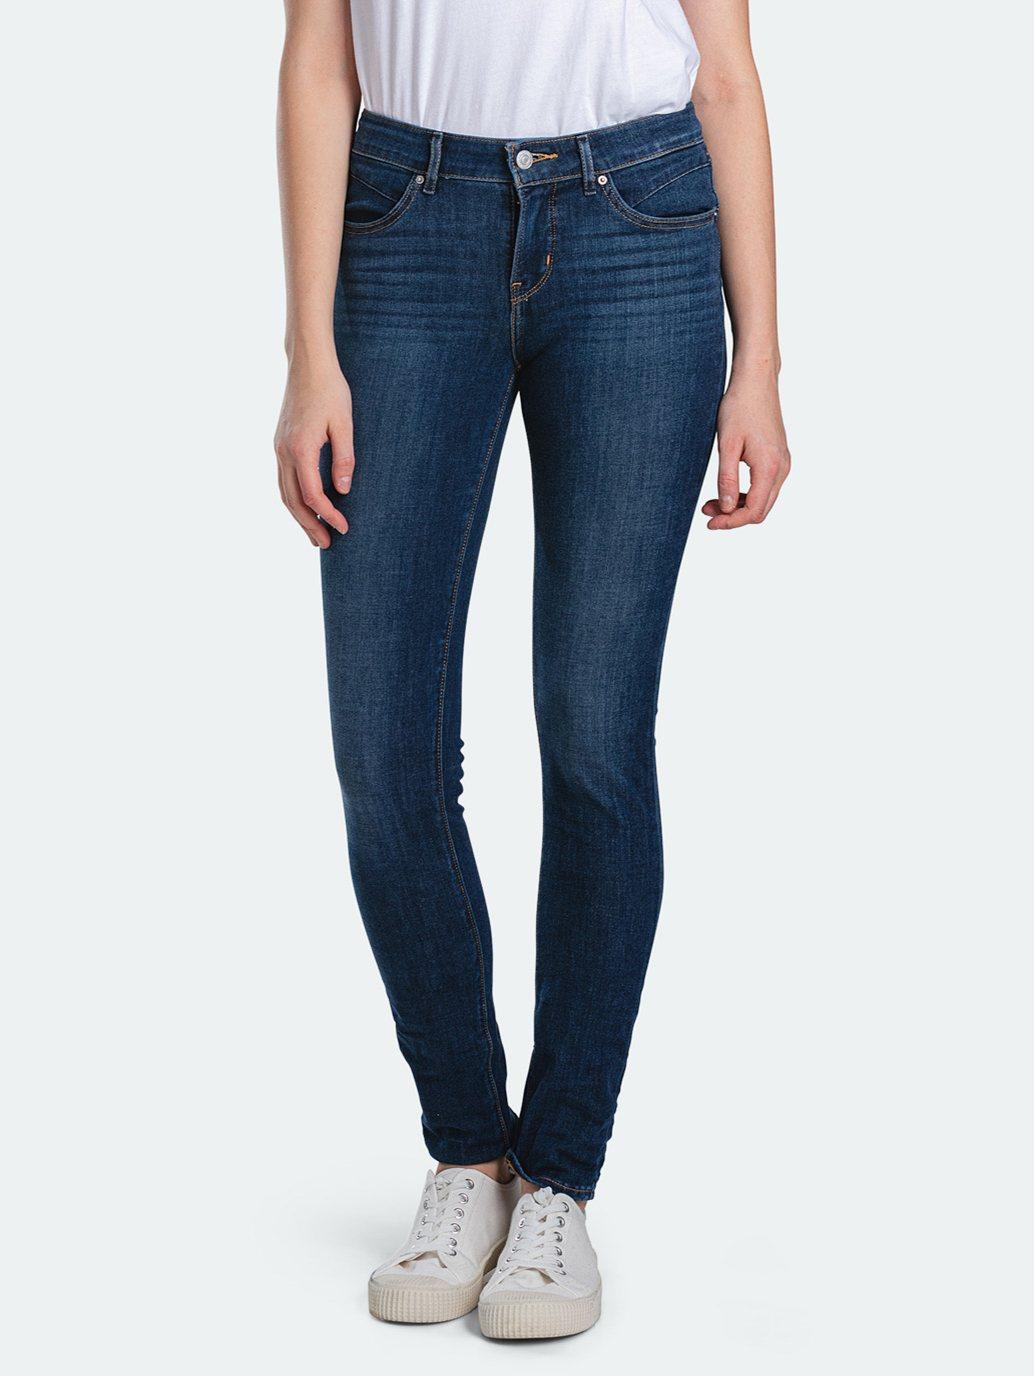 Beli Revel™ Shaping Skinny Jeans| Levis Official Online Store ID